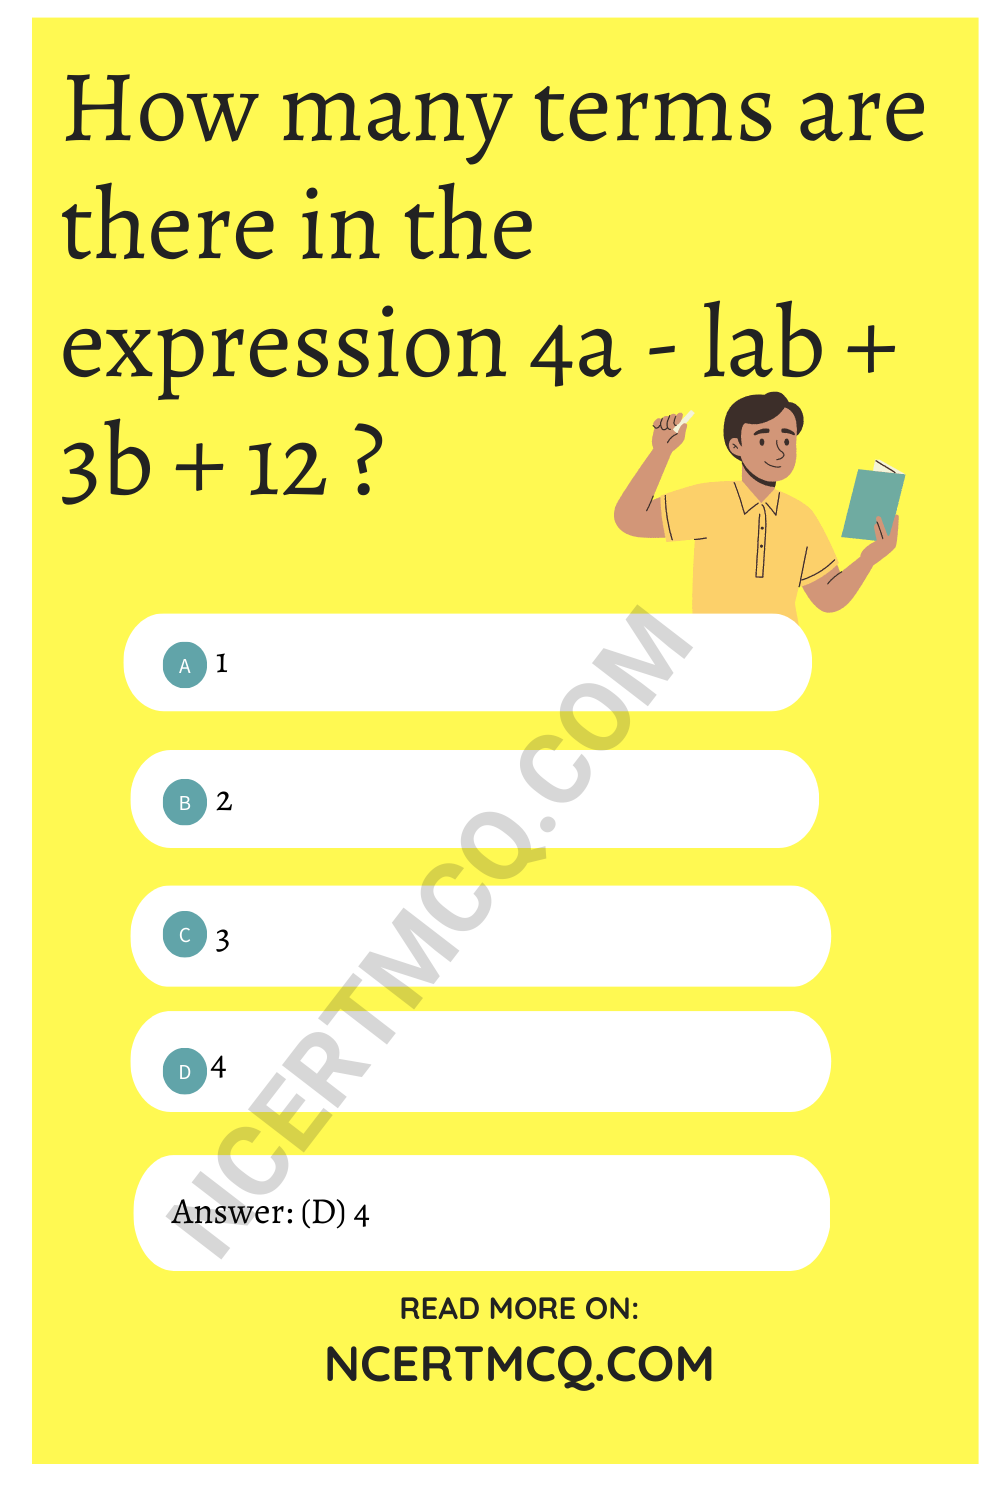 How many terms are there in the expression 4a - lab + 3b + 12 ?